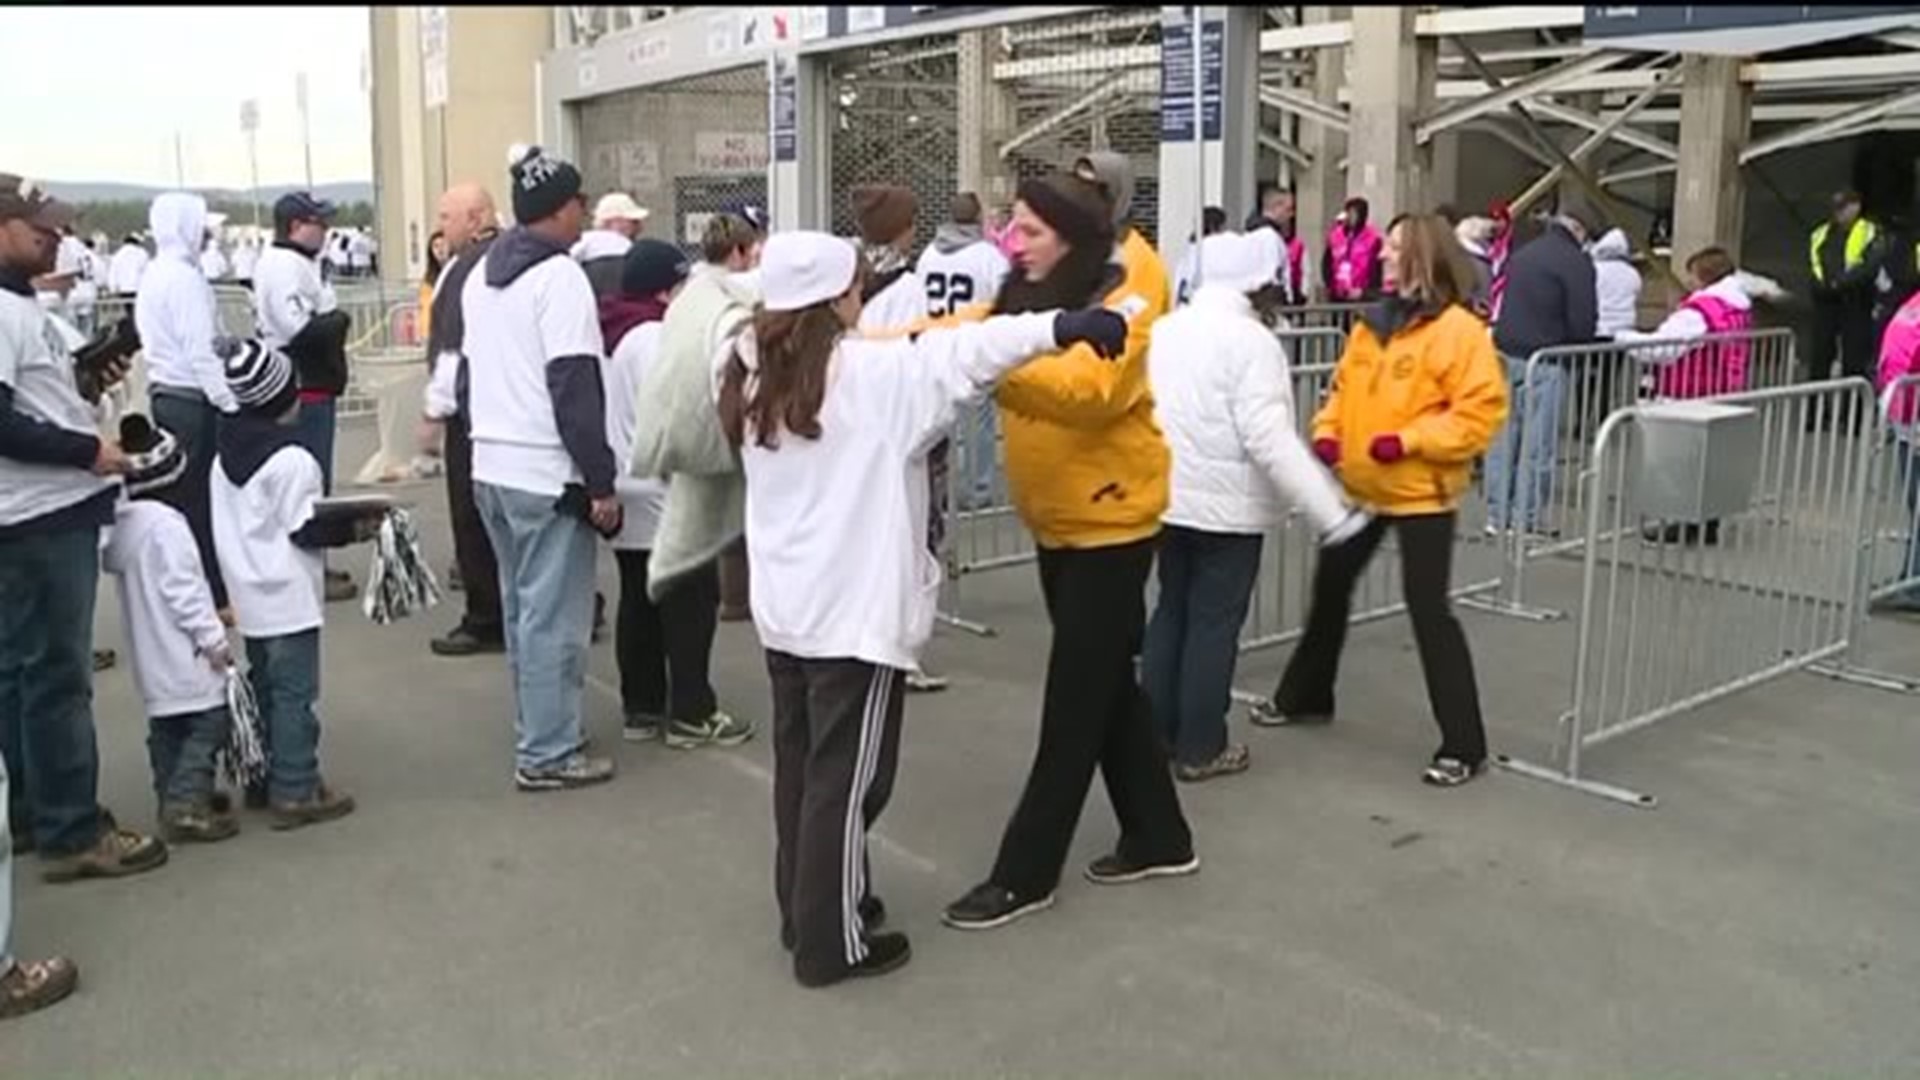 Increased Security at Penn State Football Game